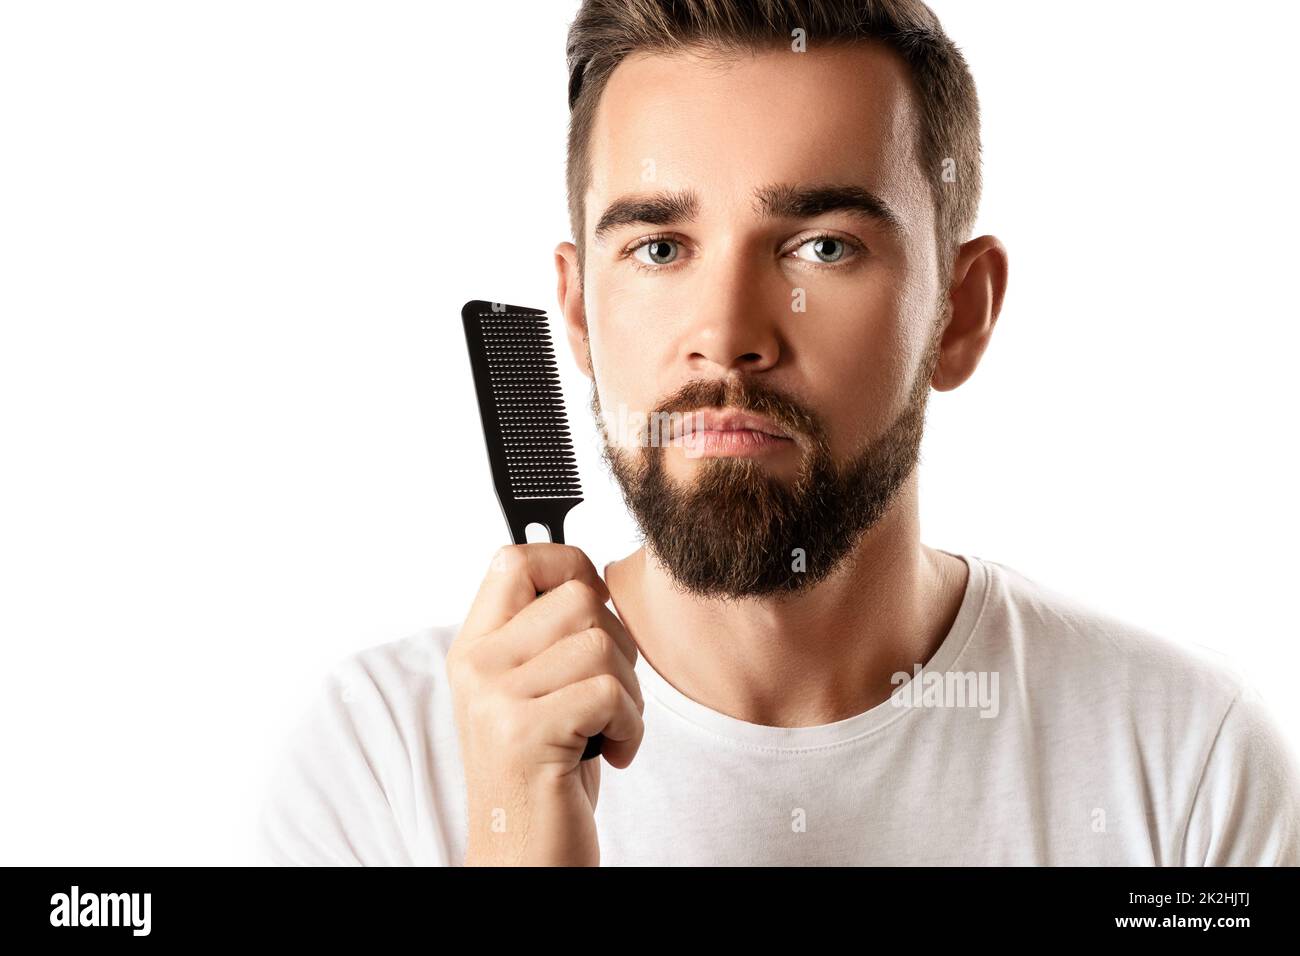 Handsome well groomed man combing his beard Stock Photo